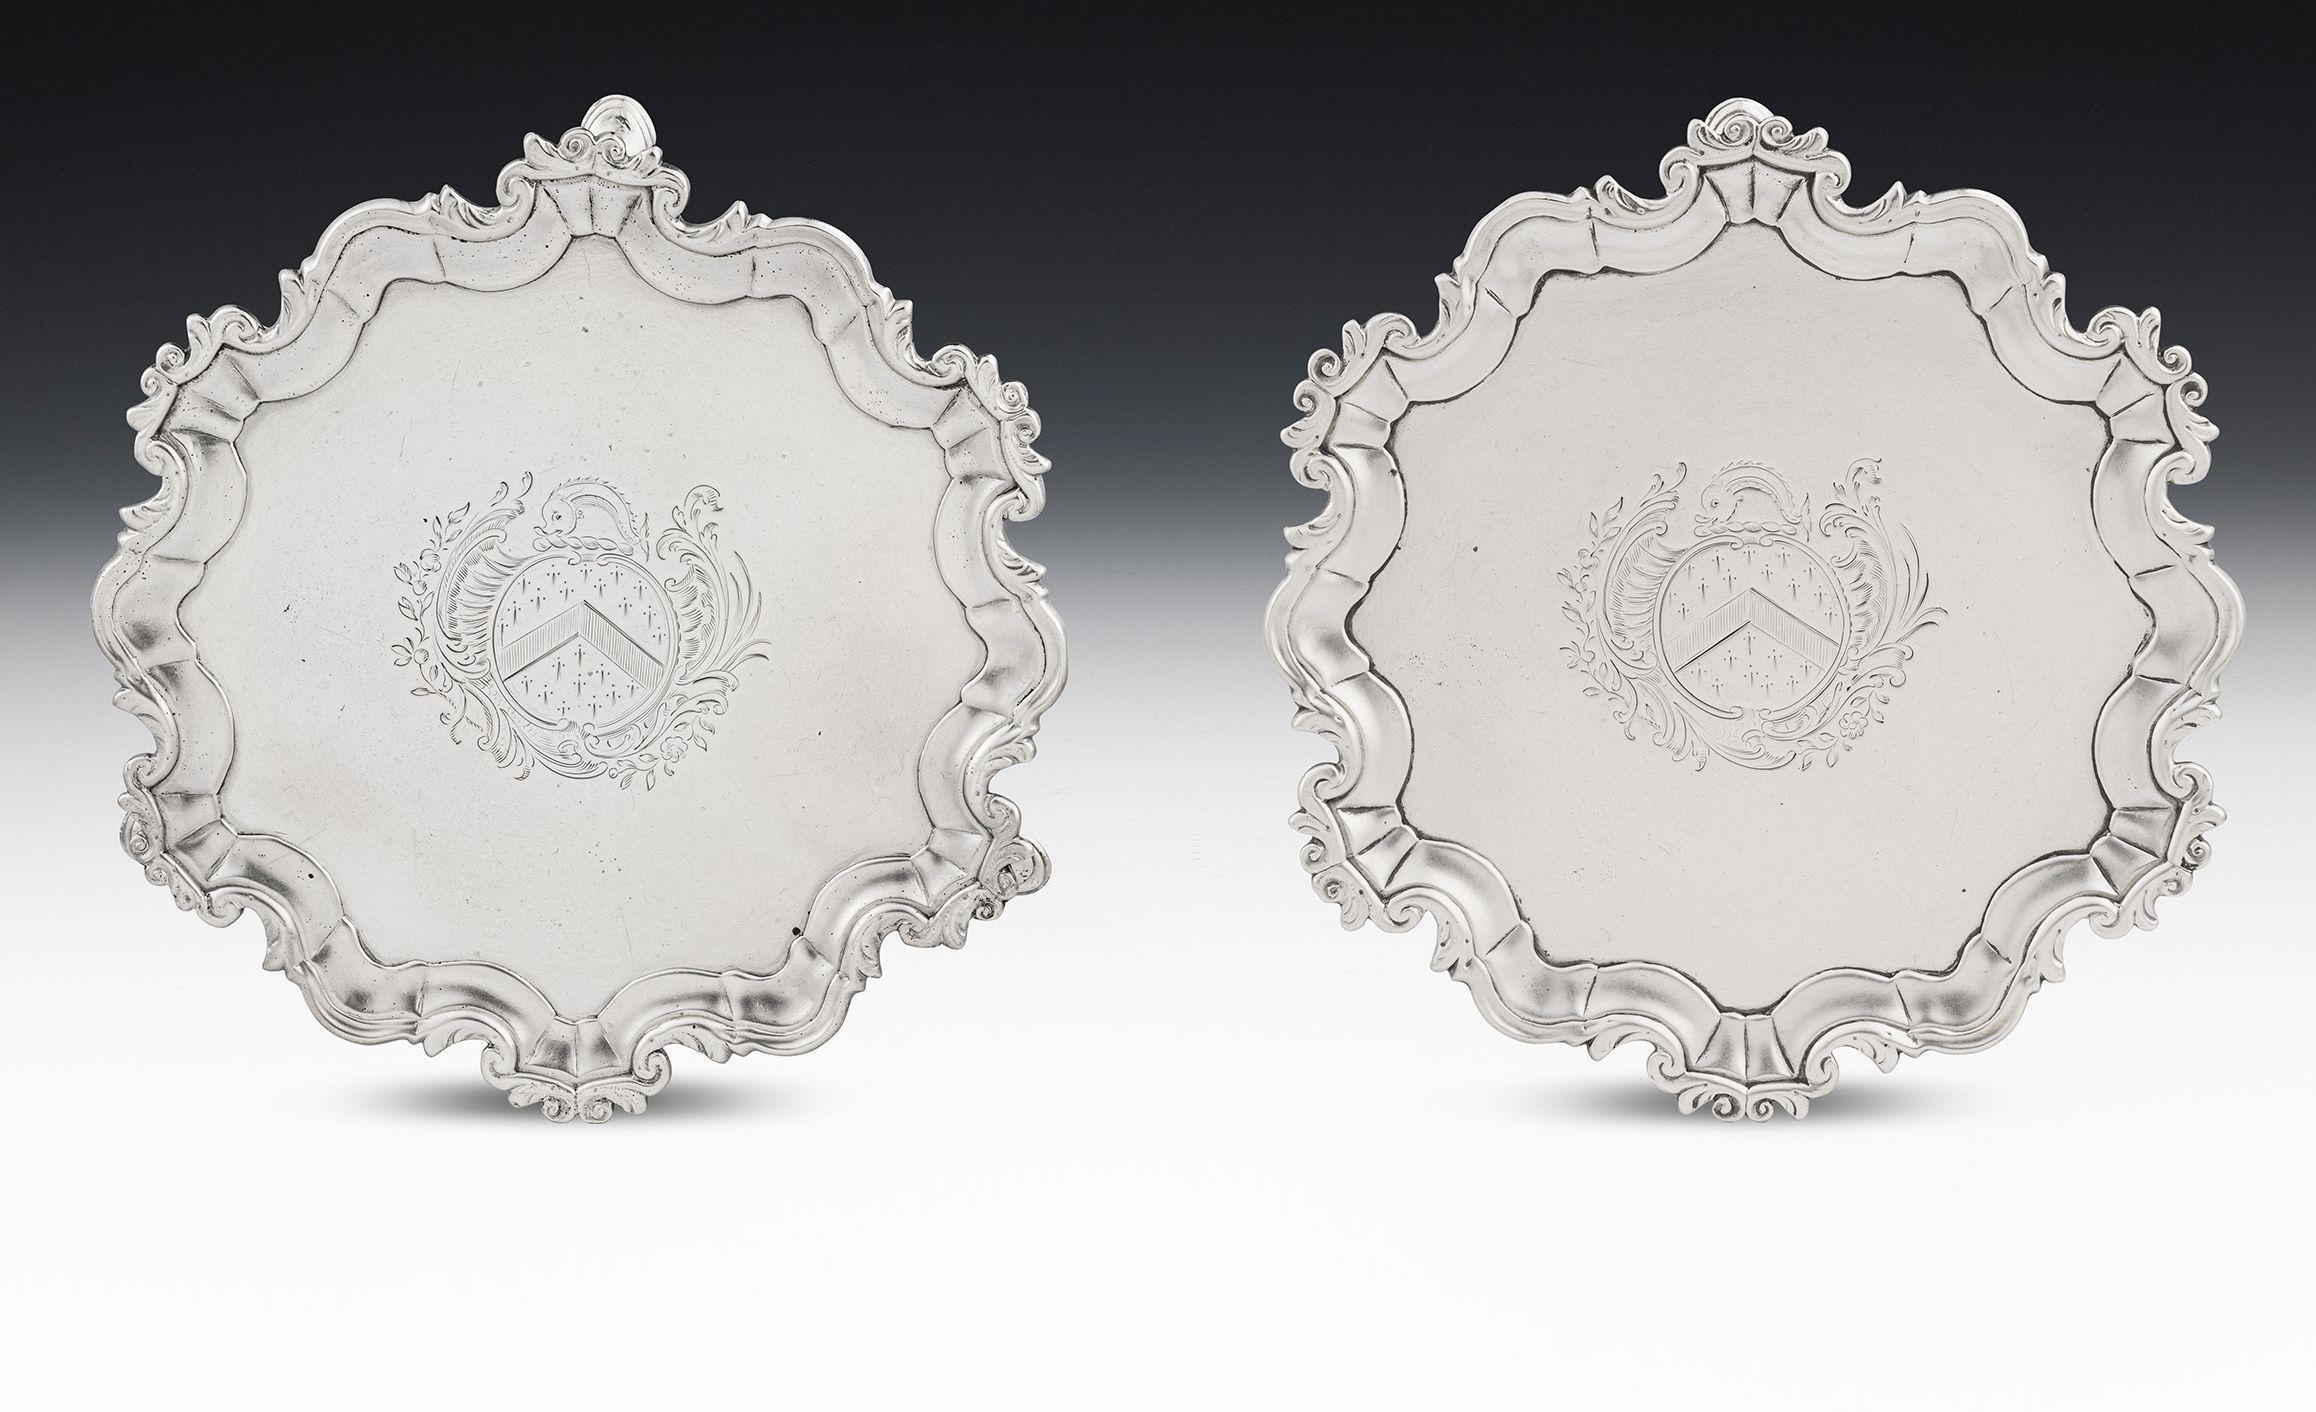 A Rare Pair of George II Waiters or Bottle Stands Made in Dublin circa 1755 by James Warren.

The Waiters are of an unusual size and stand on three hoof feet. The raised scroll border is decorated with foliate motifs and the centre of each piece is